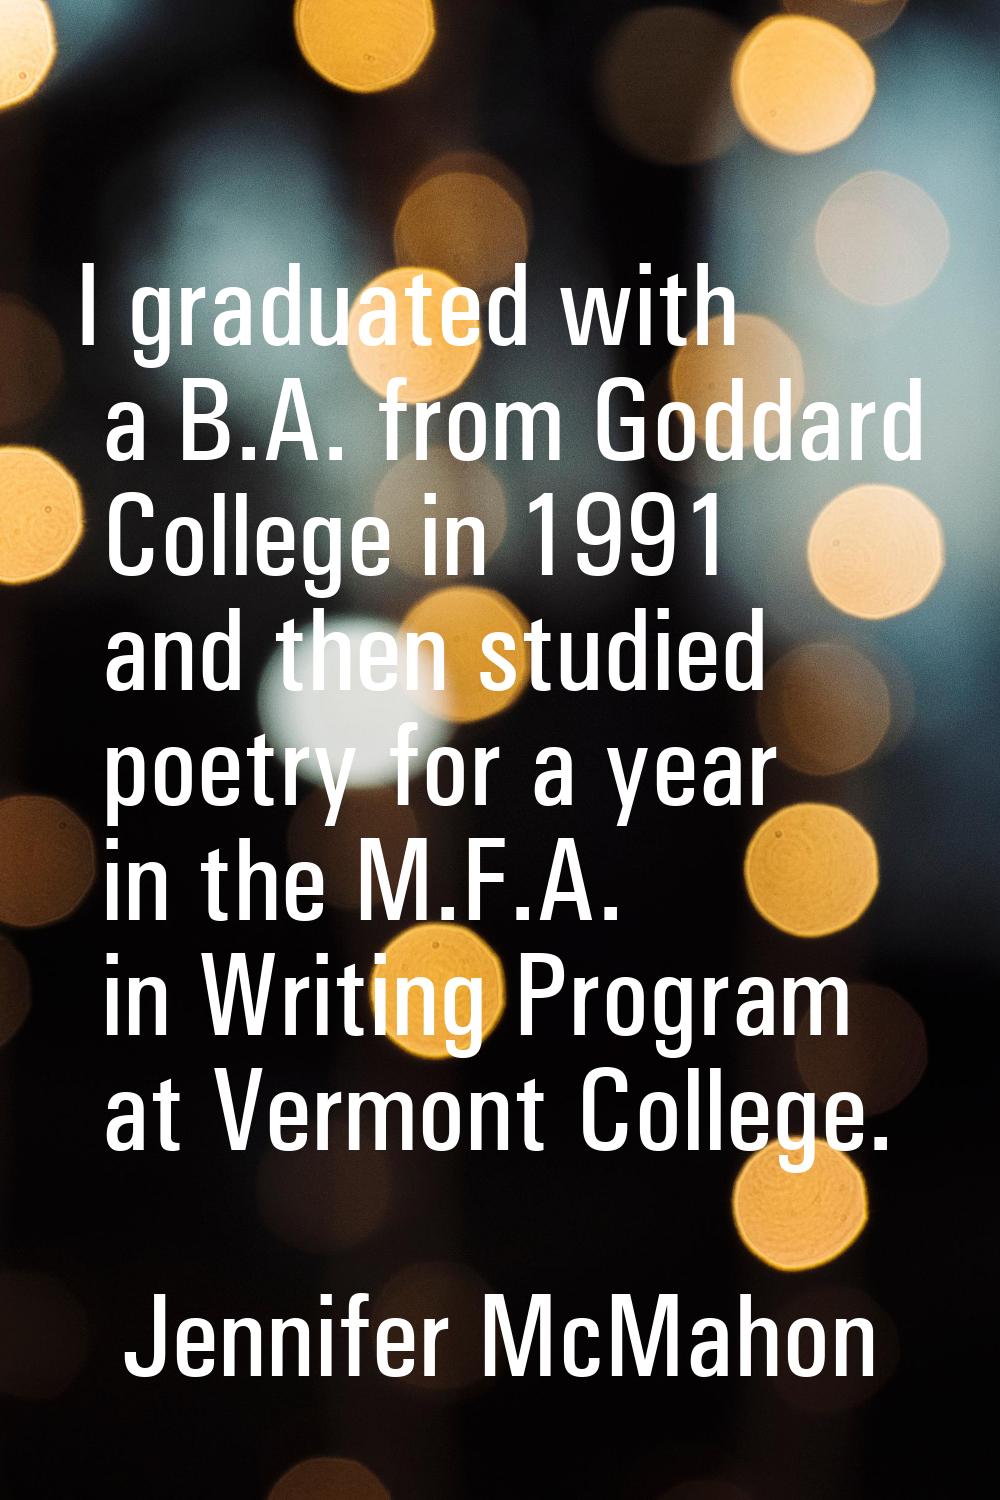 I graduated with a B.A. from Goddard College in 1991 and then studied poetry for a year in the M.F.